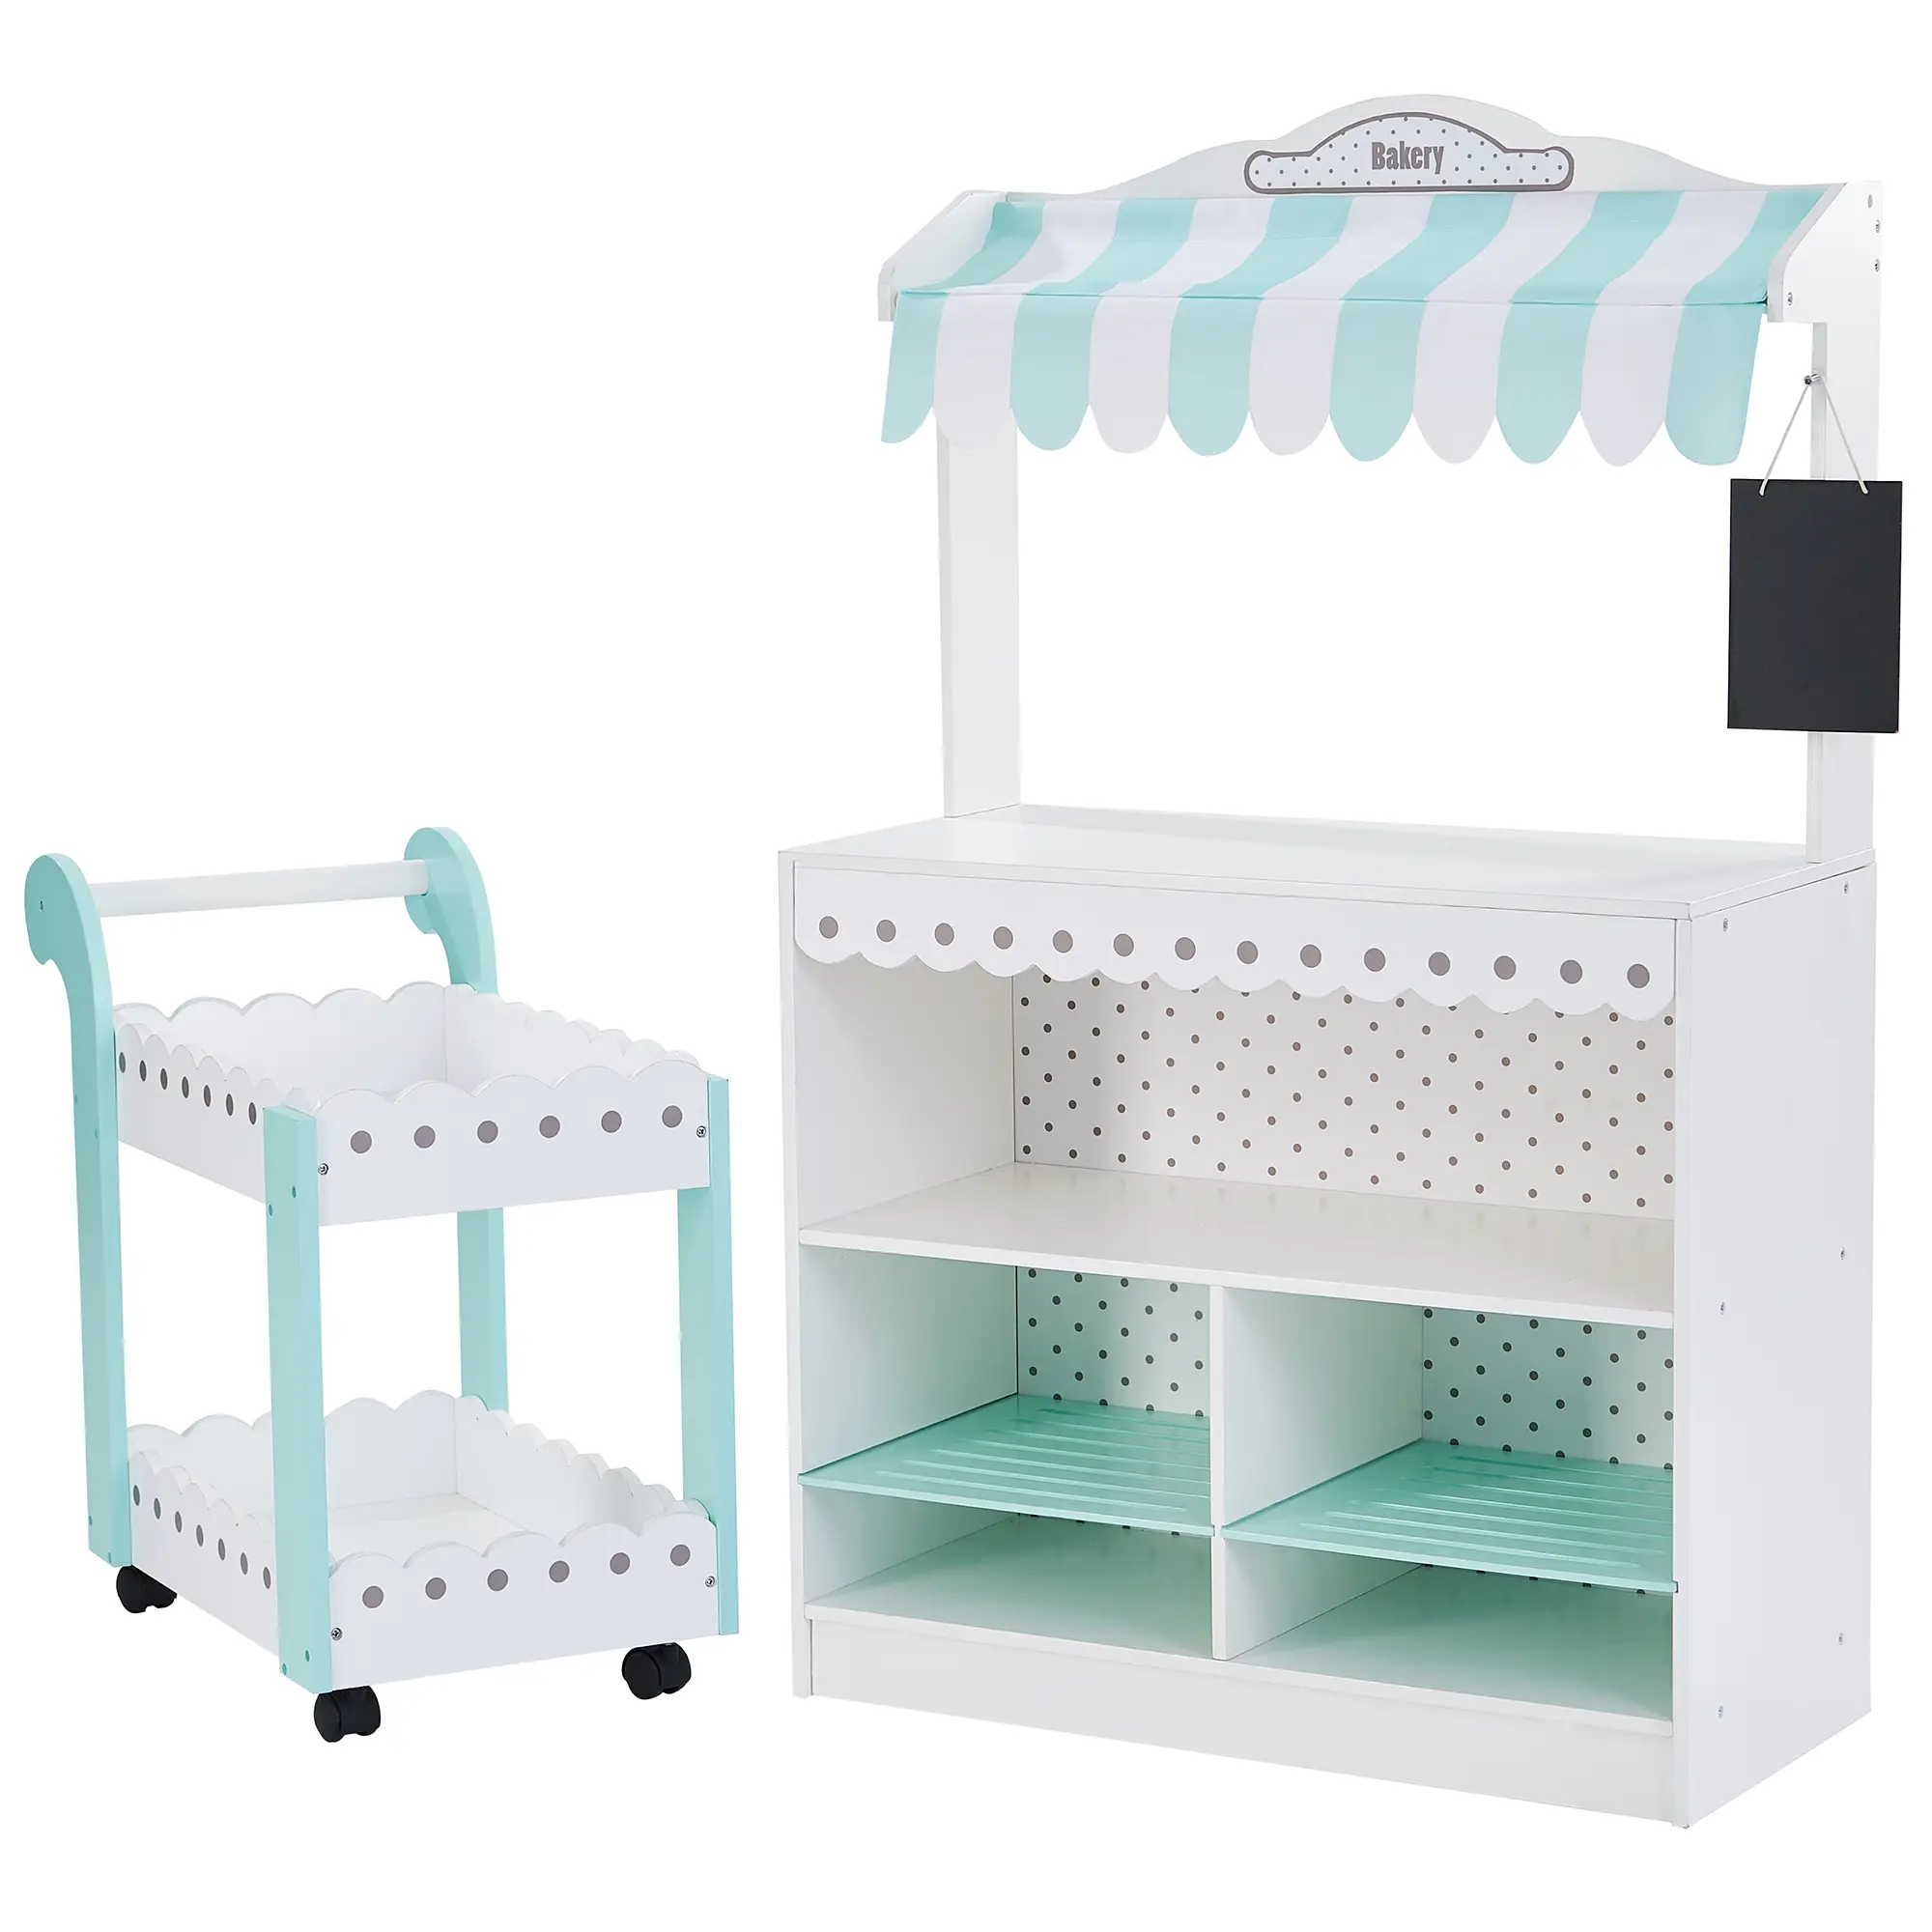 Stand Stand Play Kinder TD-13003A Desert